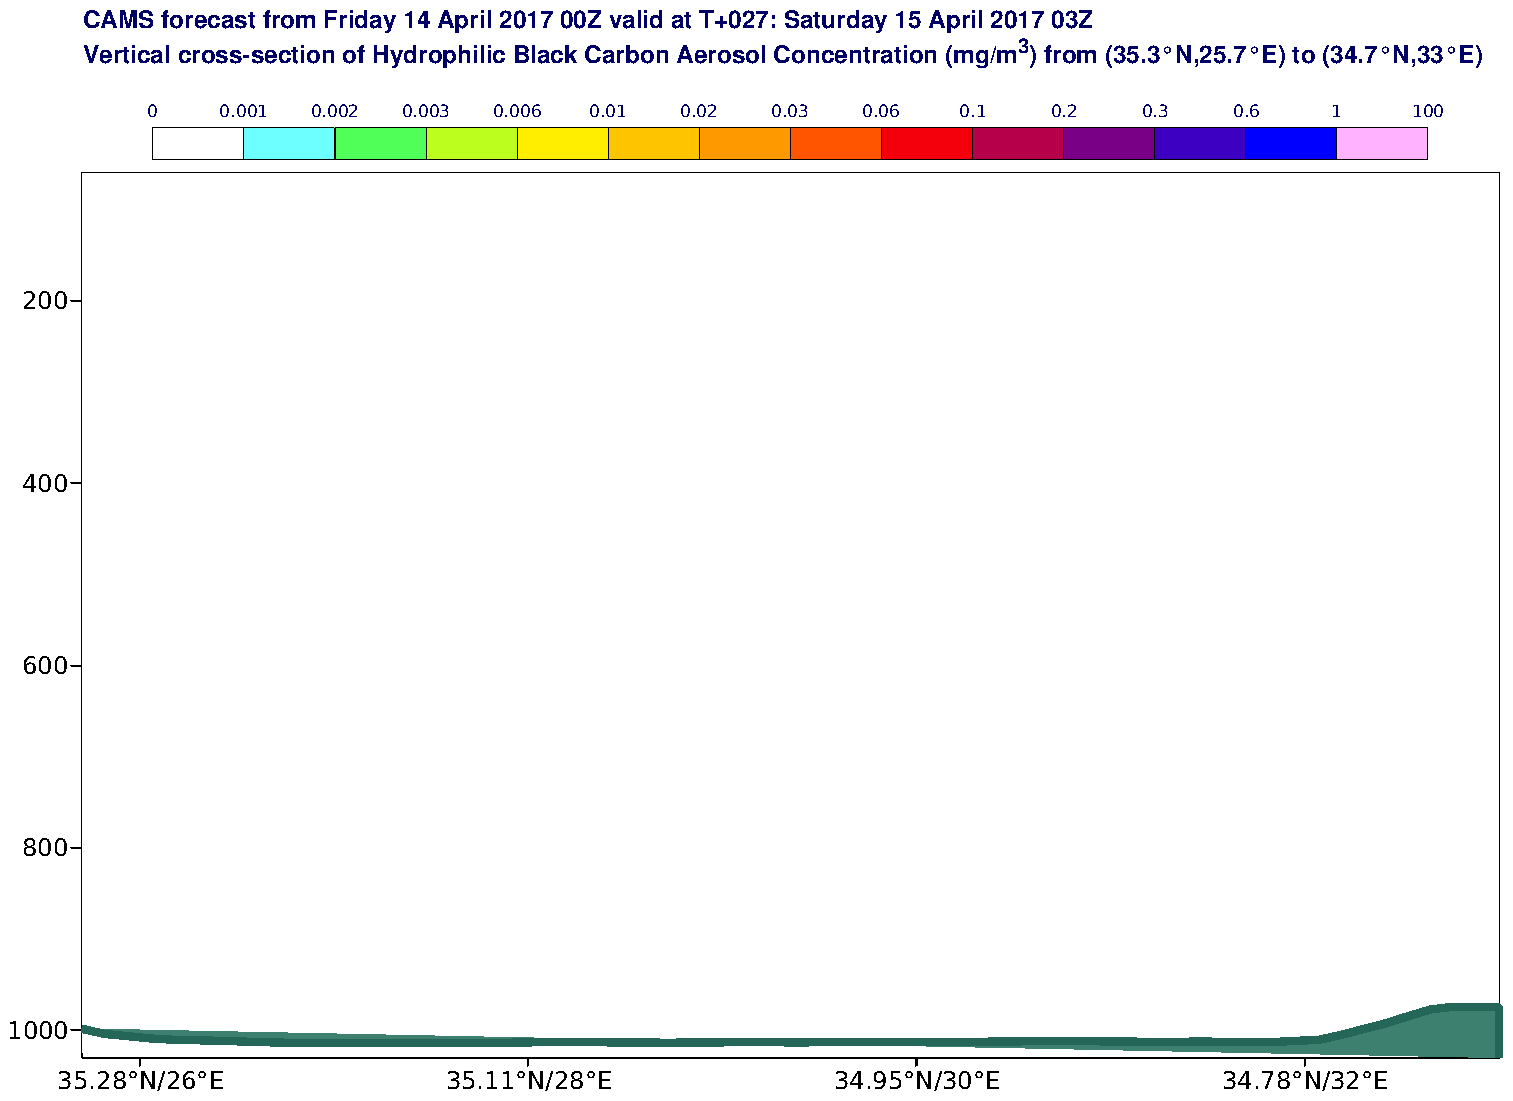 Vertical cross-section of Hydrophilic Black Carbon Aerosol Concentration (mg/m3) valid at T27 - 2017-04-15 03:00